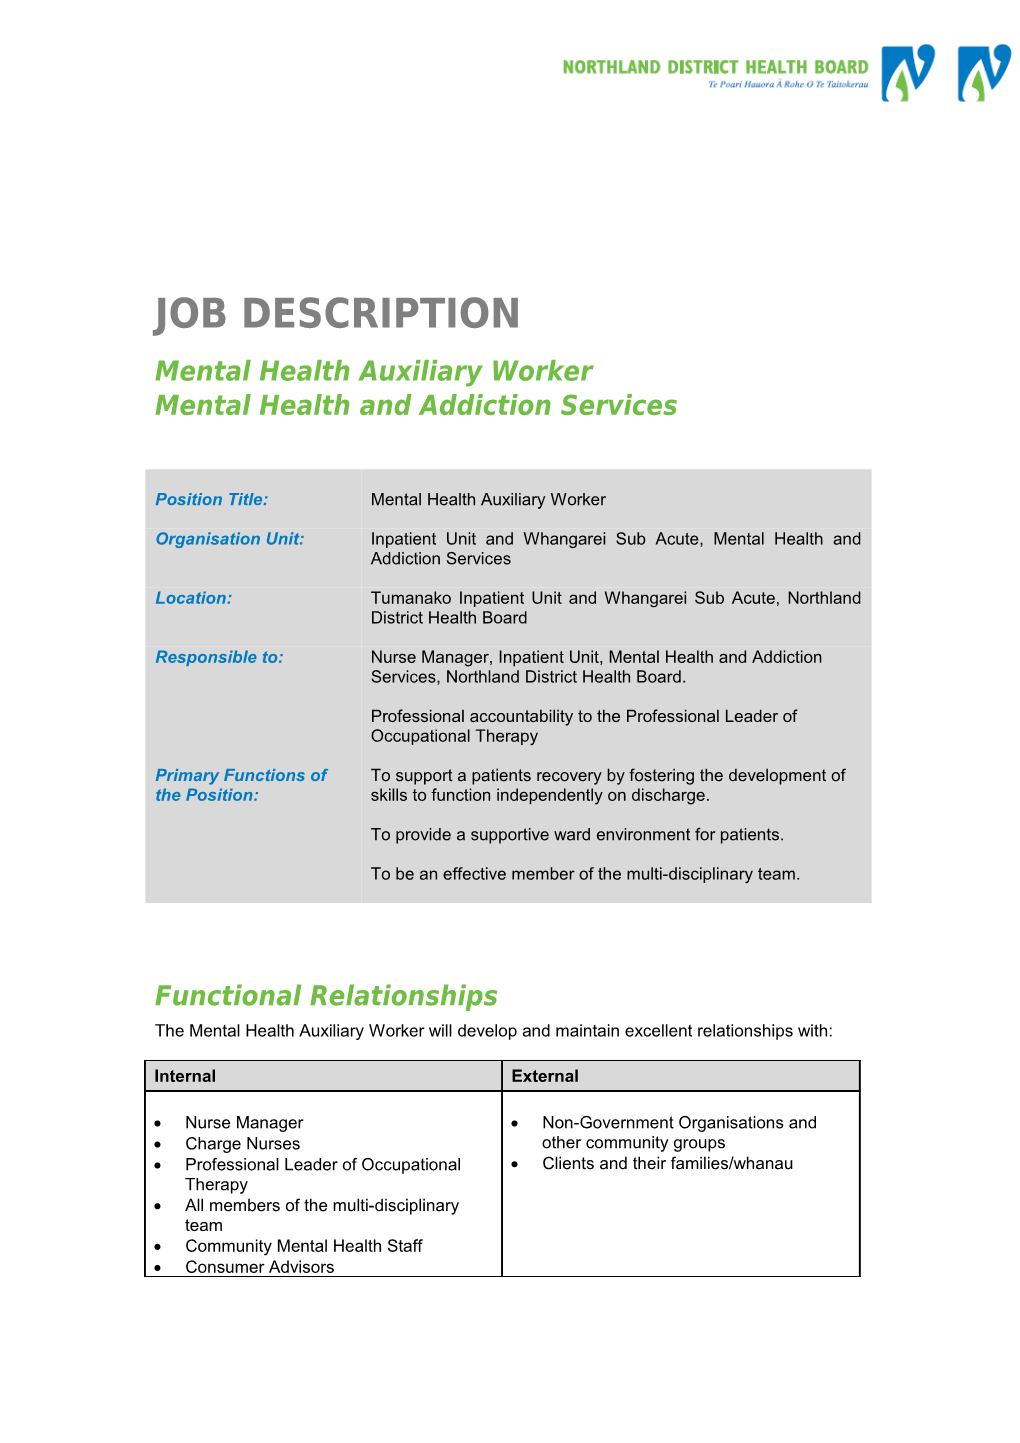 Mental Health Auxiliary Worker